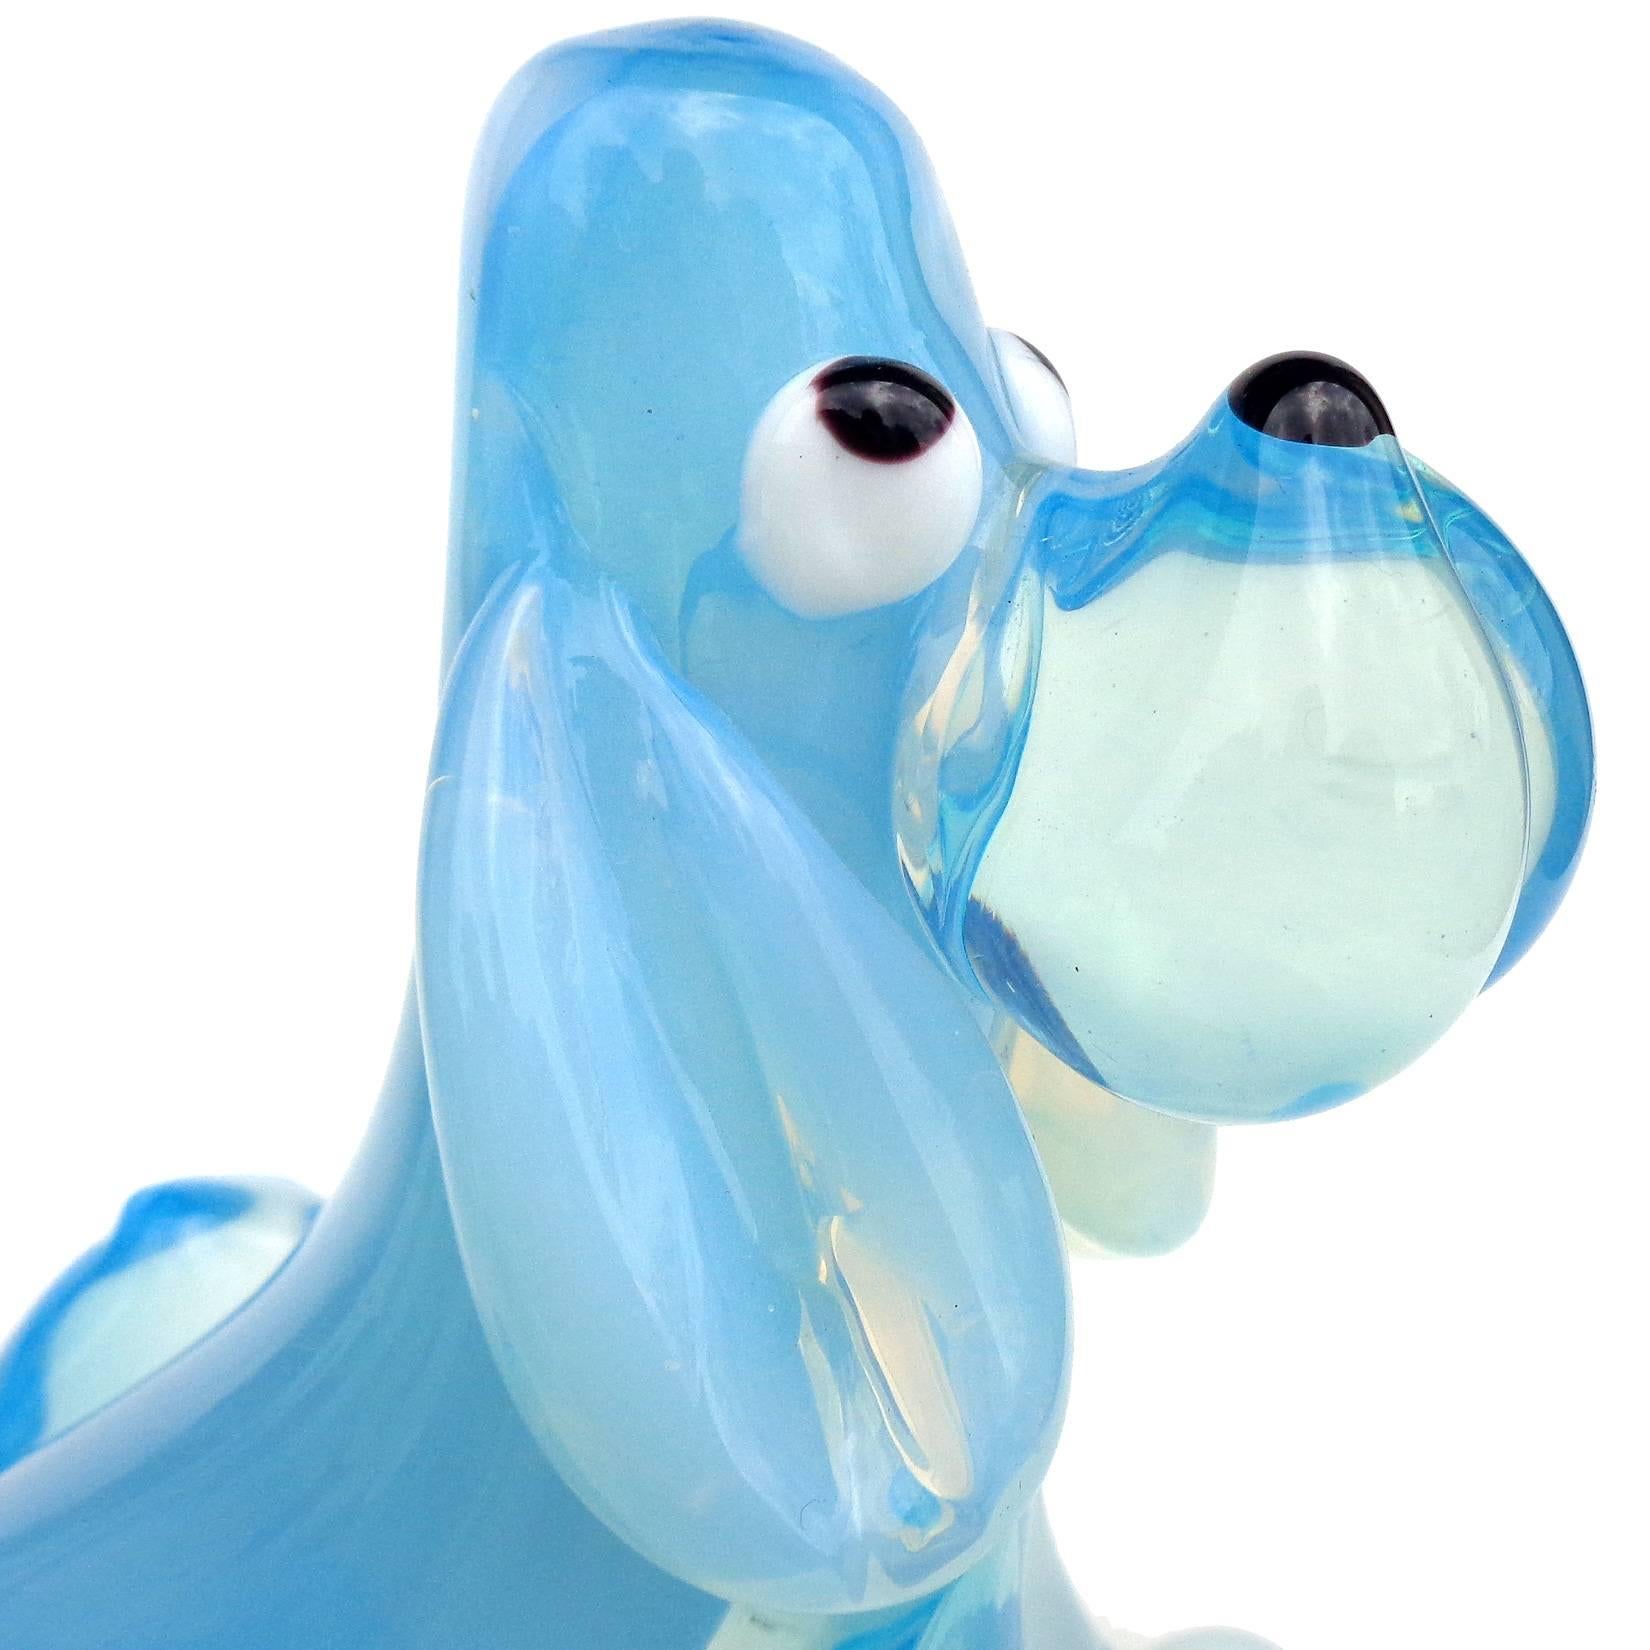 Hand-Crafted Barovier Toso Murano Opalescent Italian Art Glass Puppy Dog Figurines Sculptures